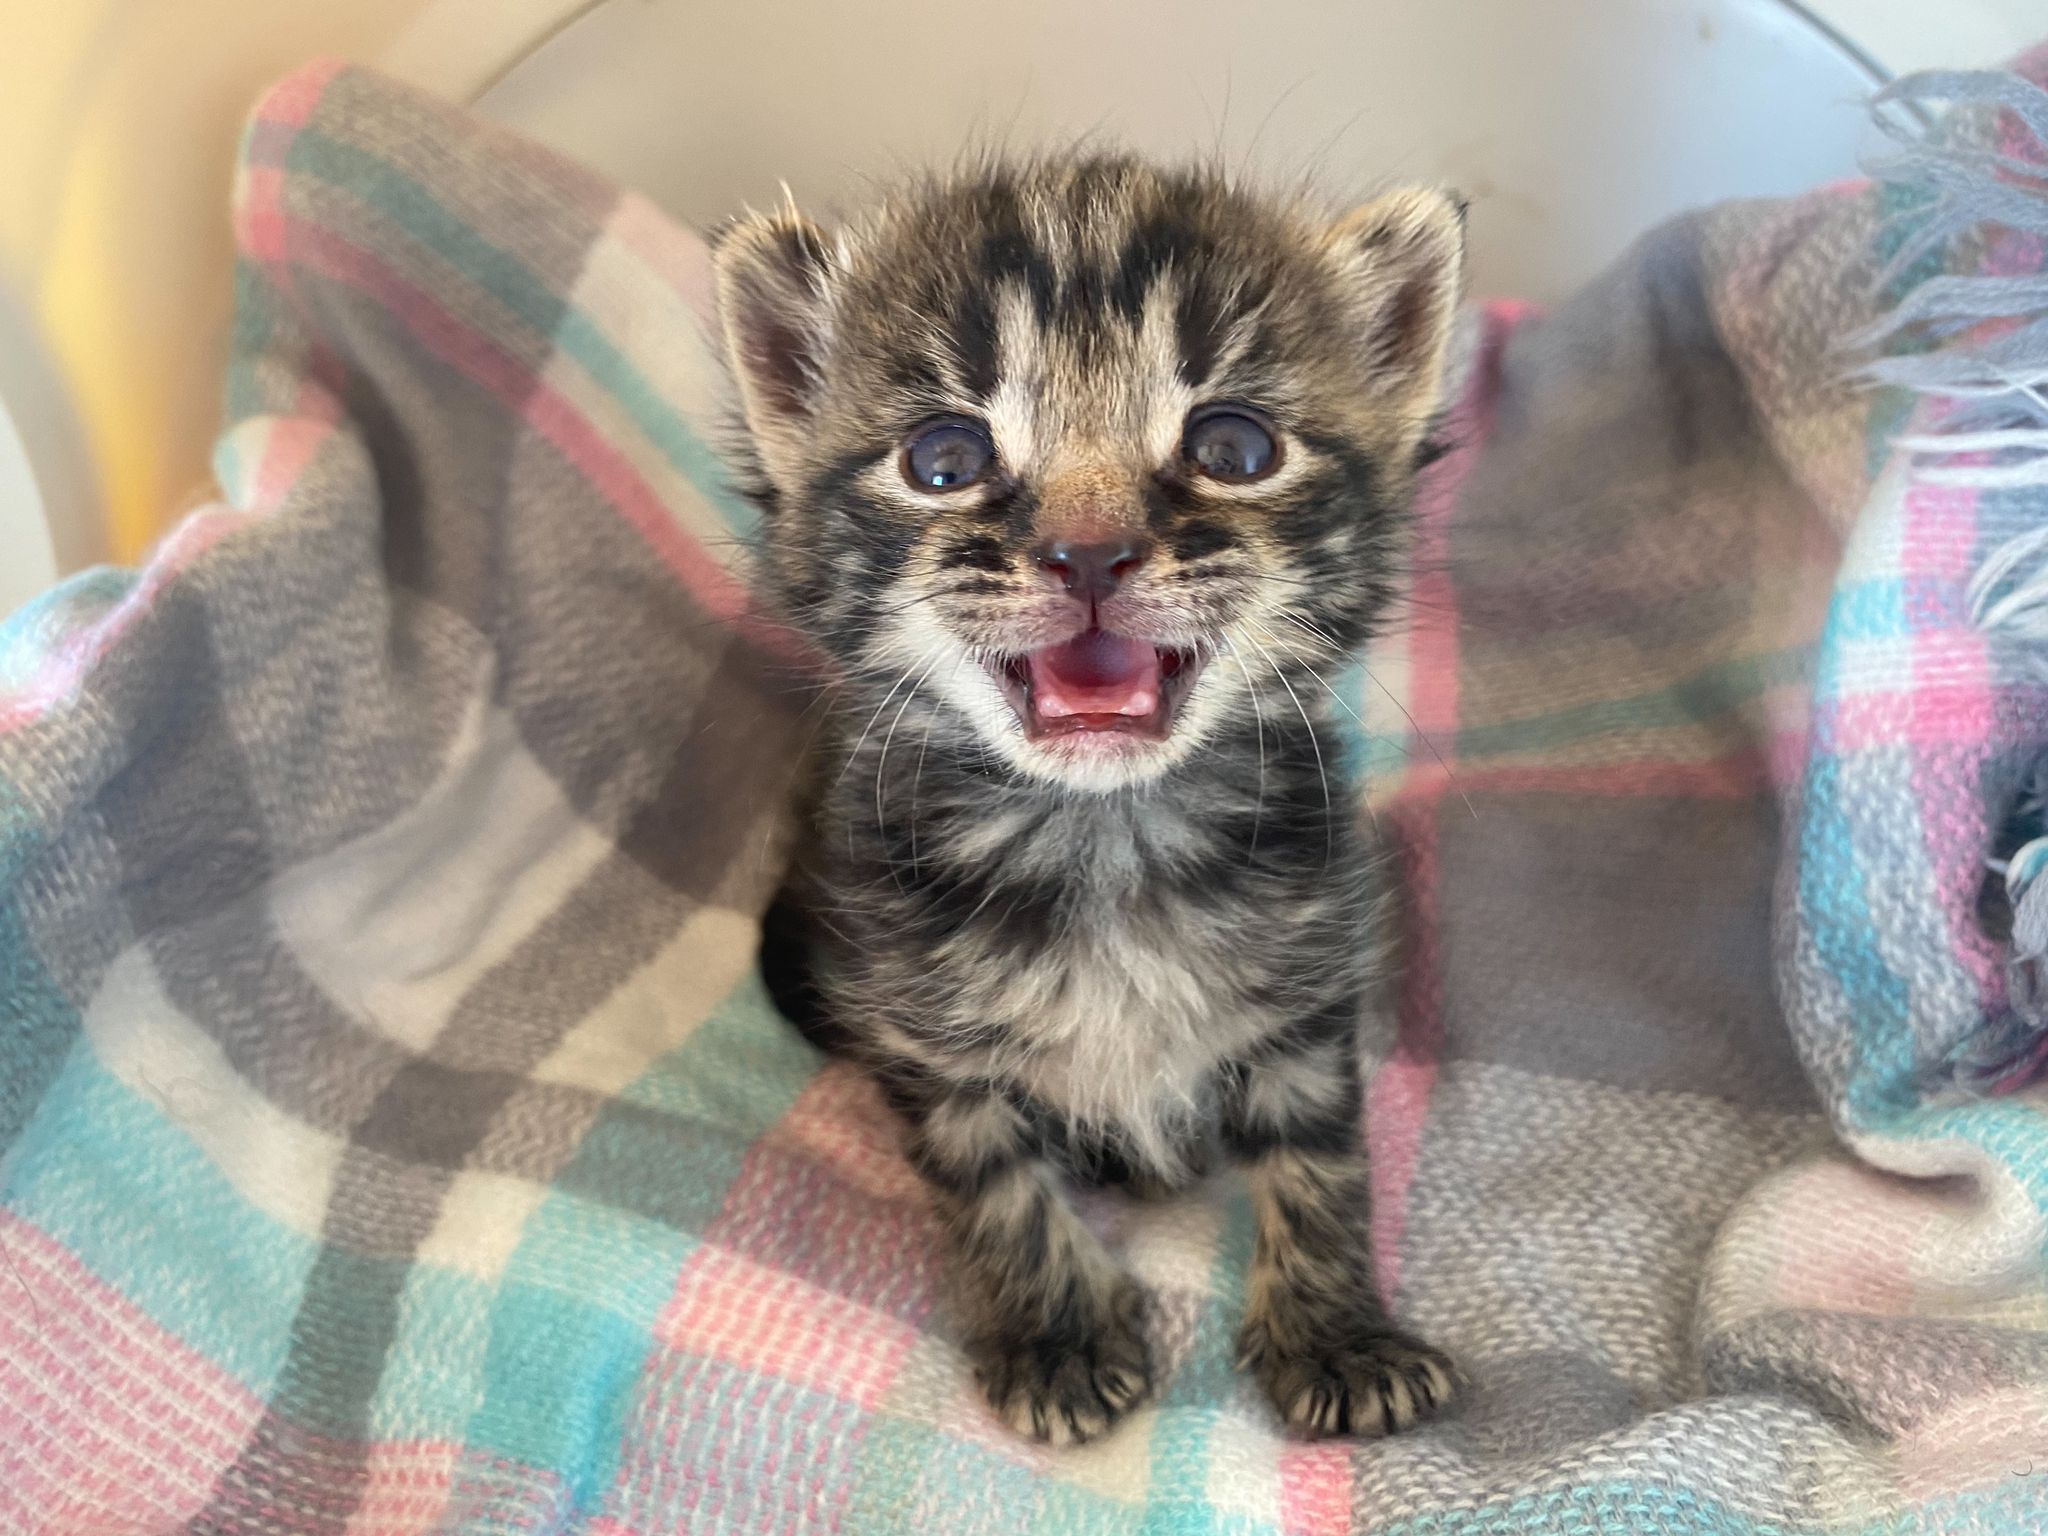 Biff the newborn kitten is thriving after he was saved from a recycling container packed full of cardboard ready to be crushed